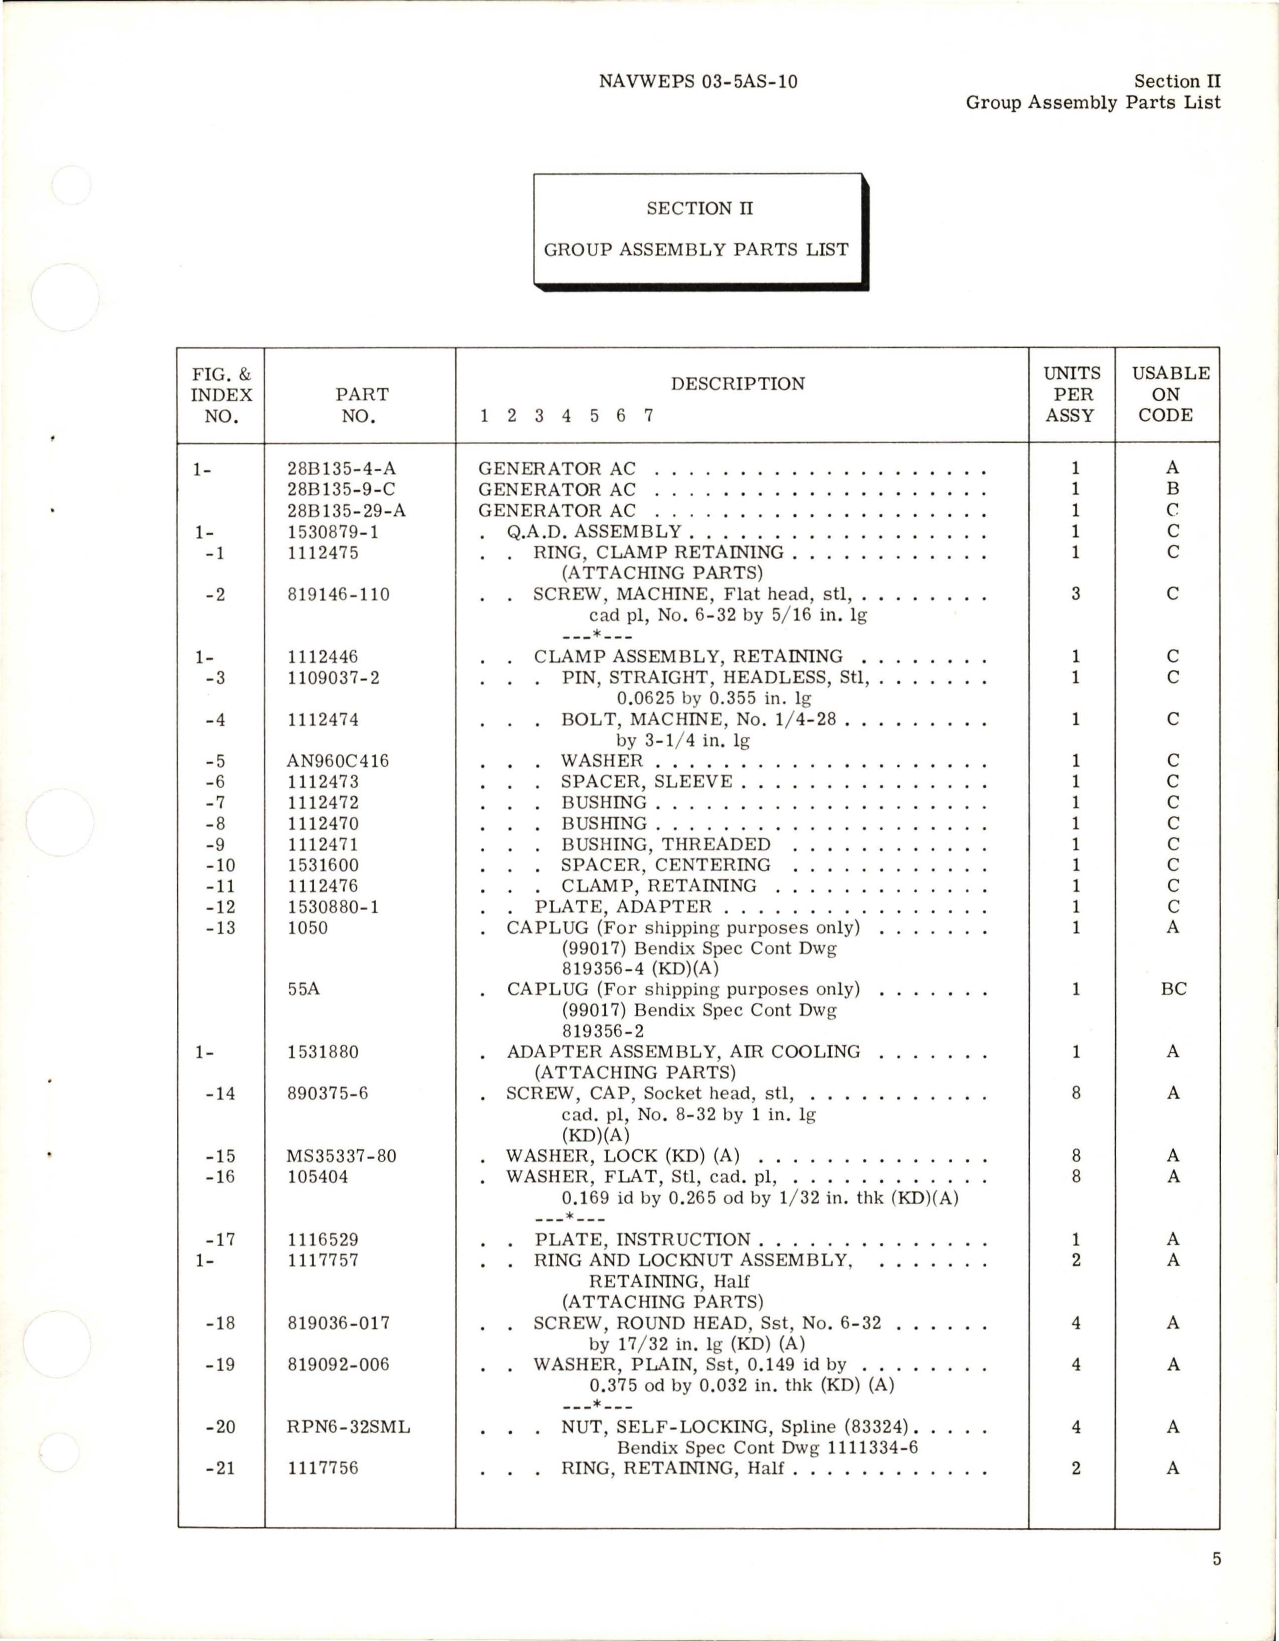 Sample page 7 from AirCorps Library document: Illustrated Parts Breakdown for AC Generator - Types 28B135-4-A, 28B135-9-C, and 28B135-29-A